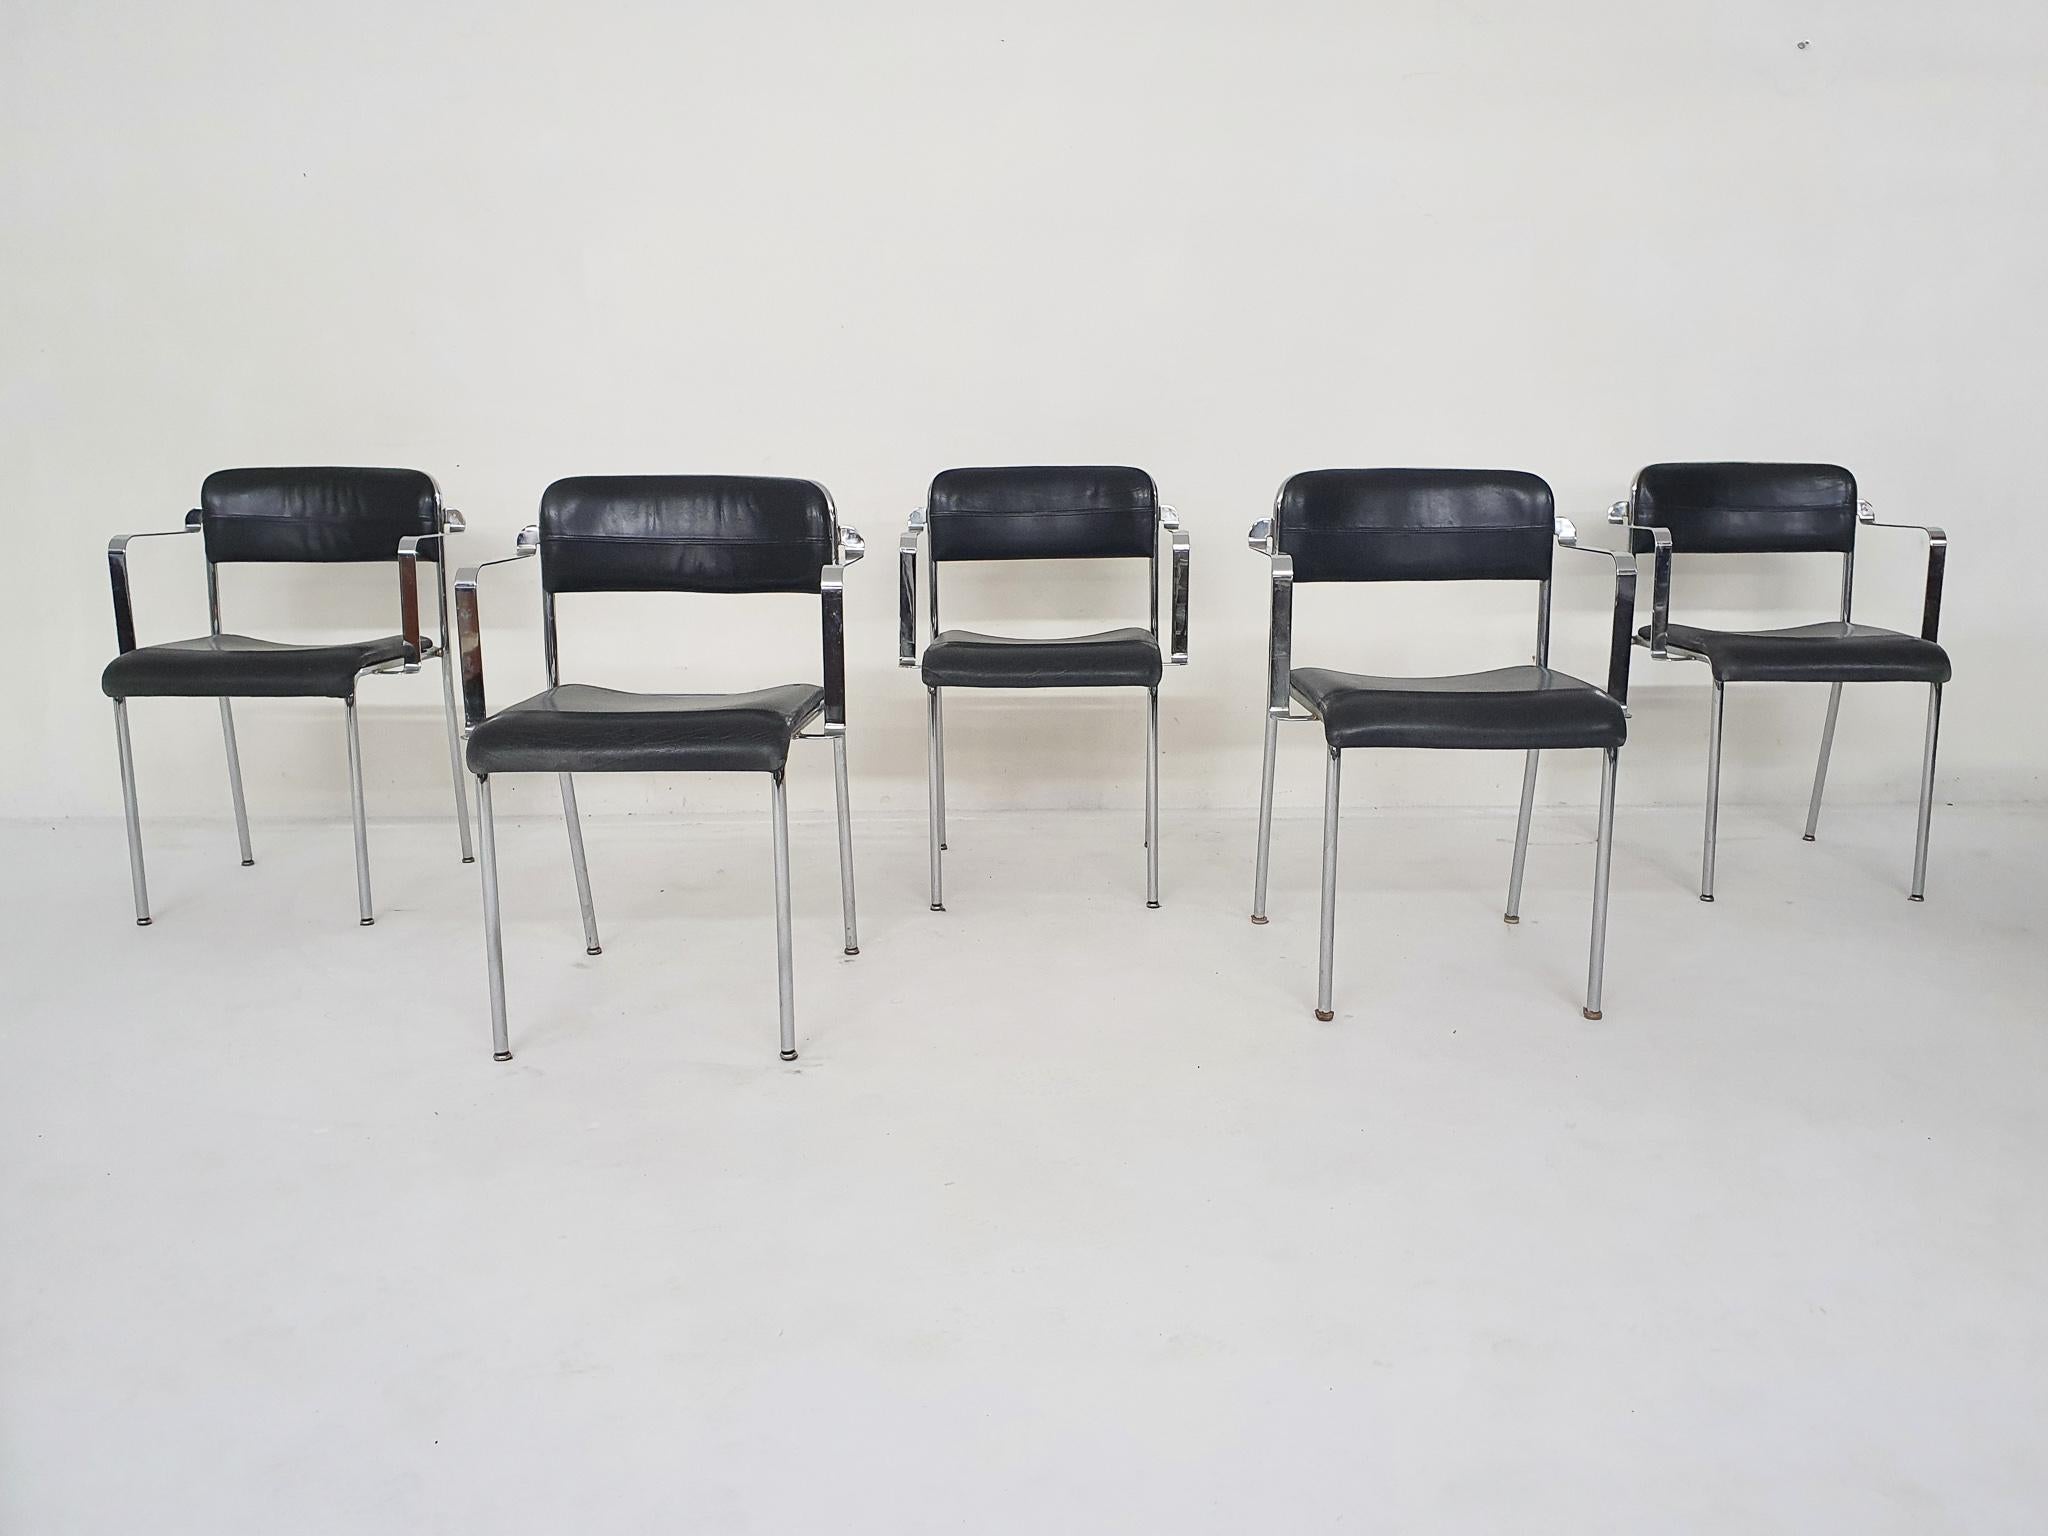 Scandinavian Modern Set of five chrome and leather dining chairs by Aryform, Sweden 1970's For Sale